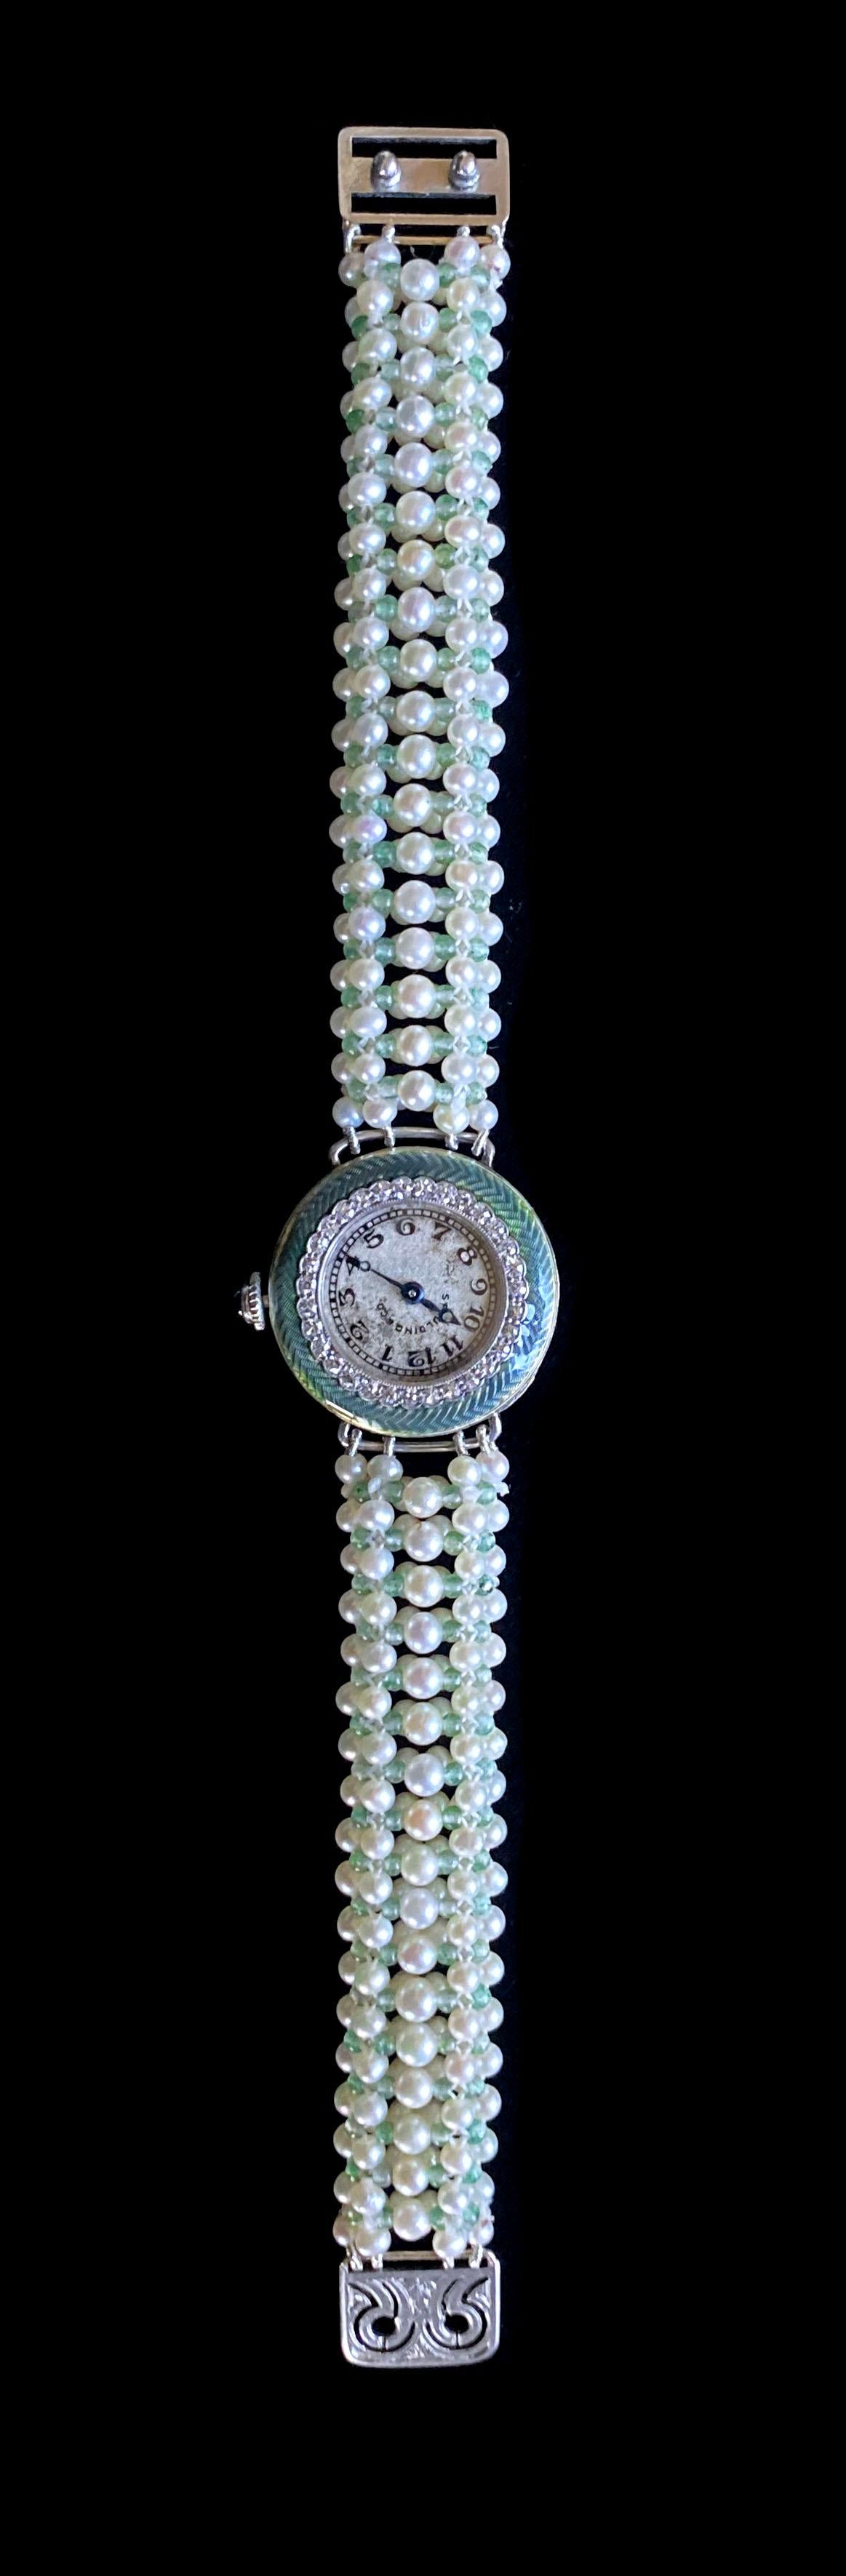 Gorgeous One of A kind watch by Marina J. An antique Diamond encrusted Edwardian Spaulding & Co Watch with Green Enamel detailing is reworked into a stunning modern piece. The watch is made of all white Platinum with a working dial on its side which